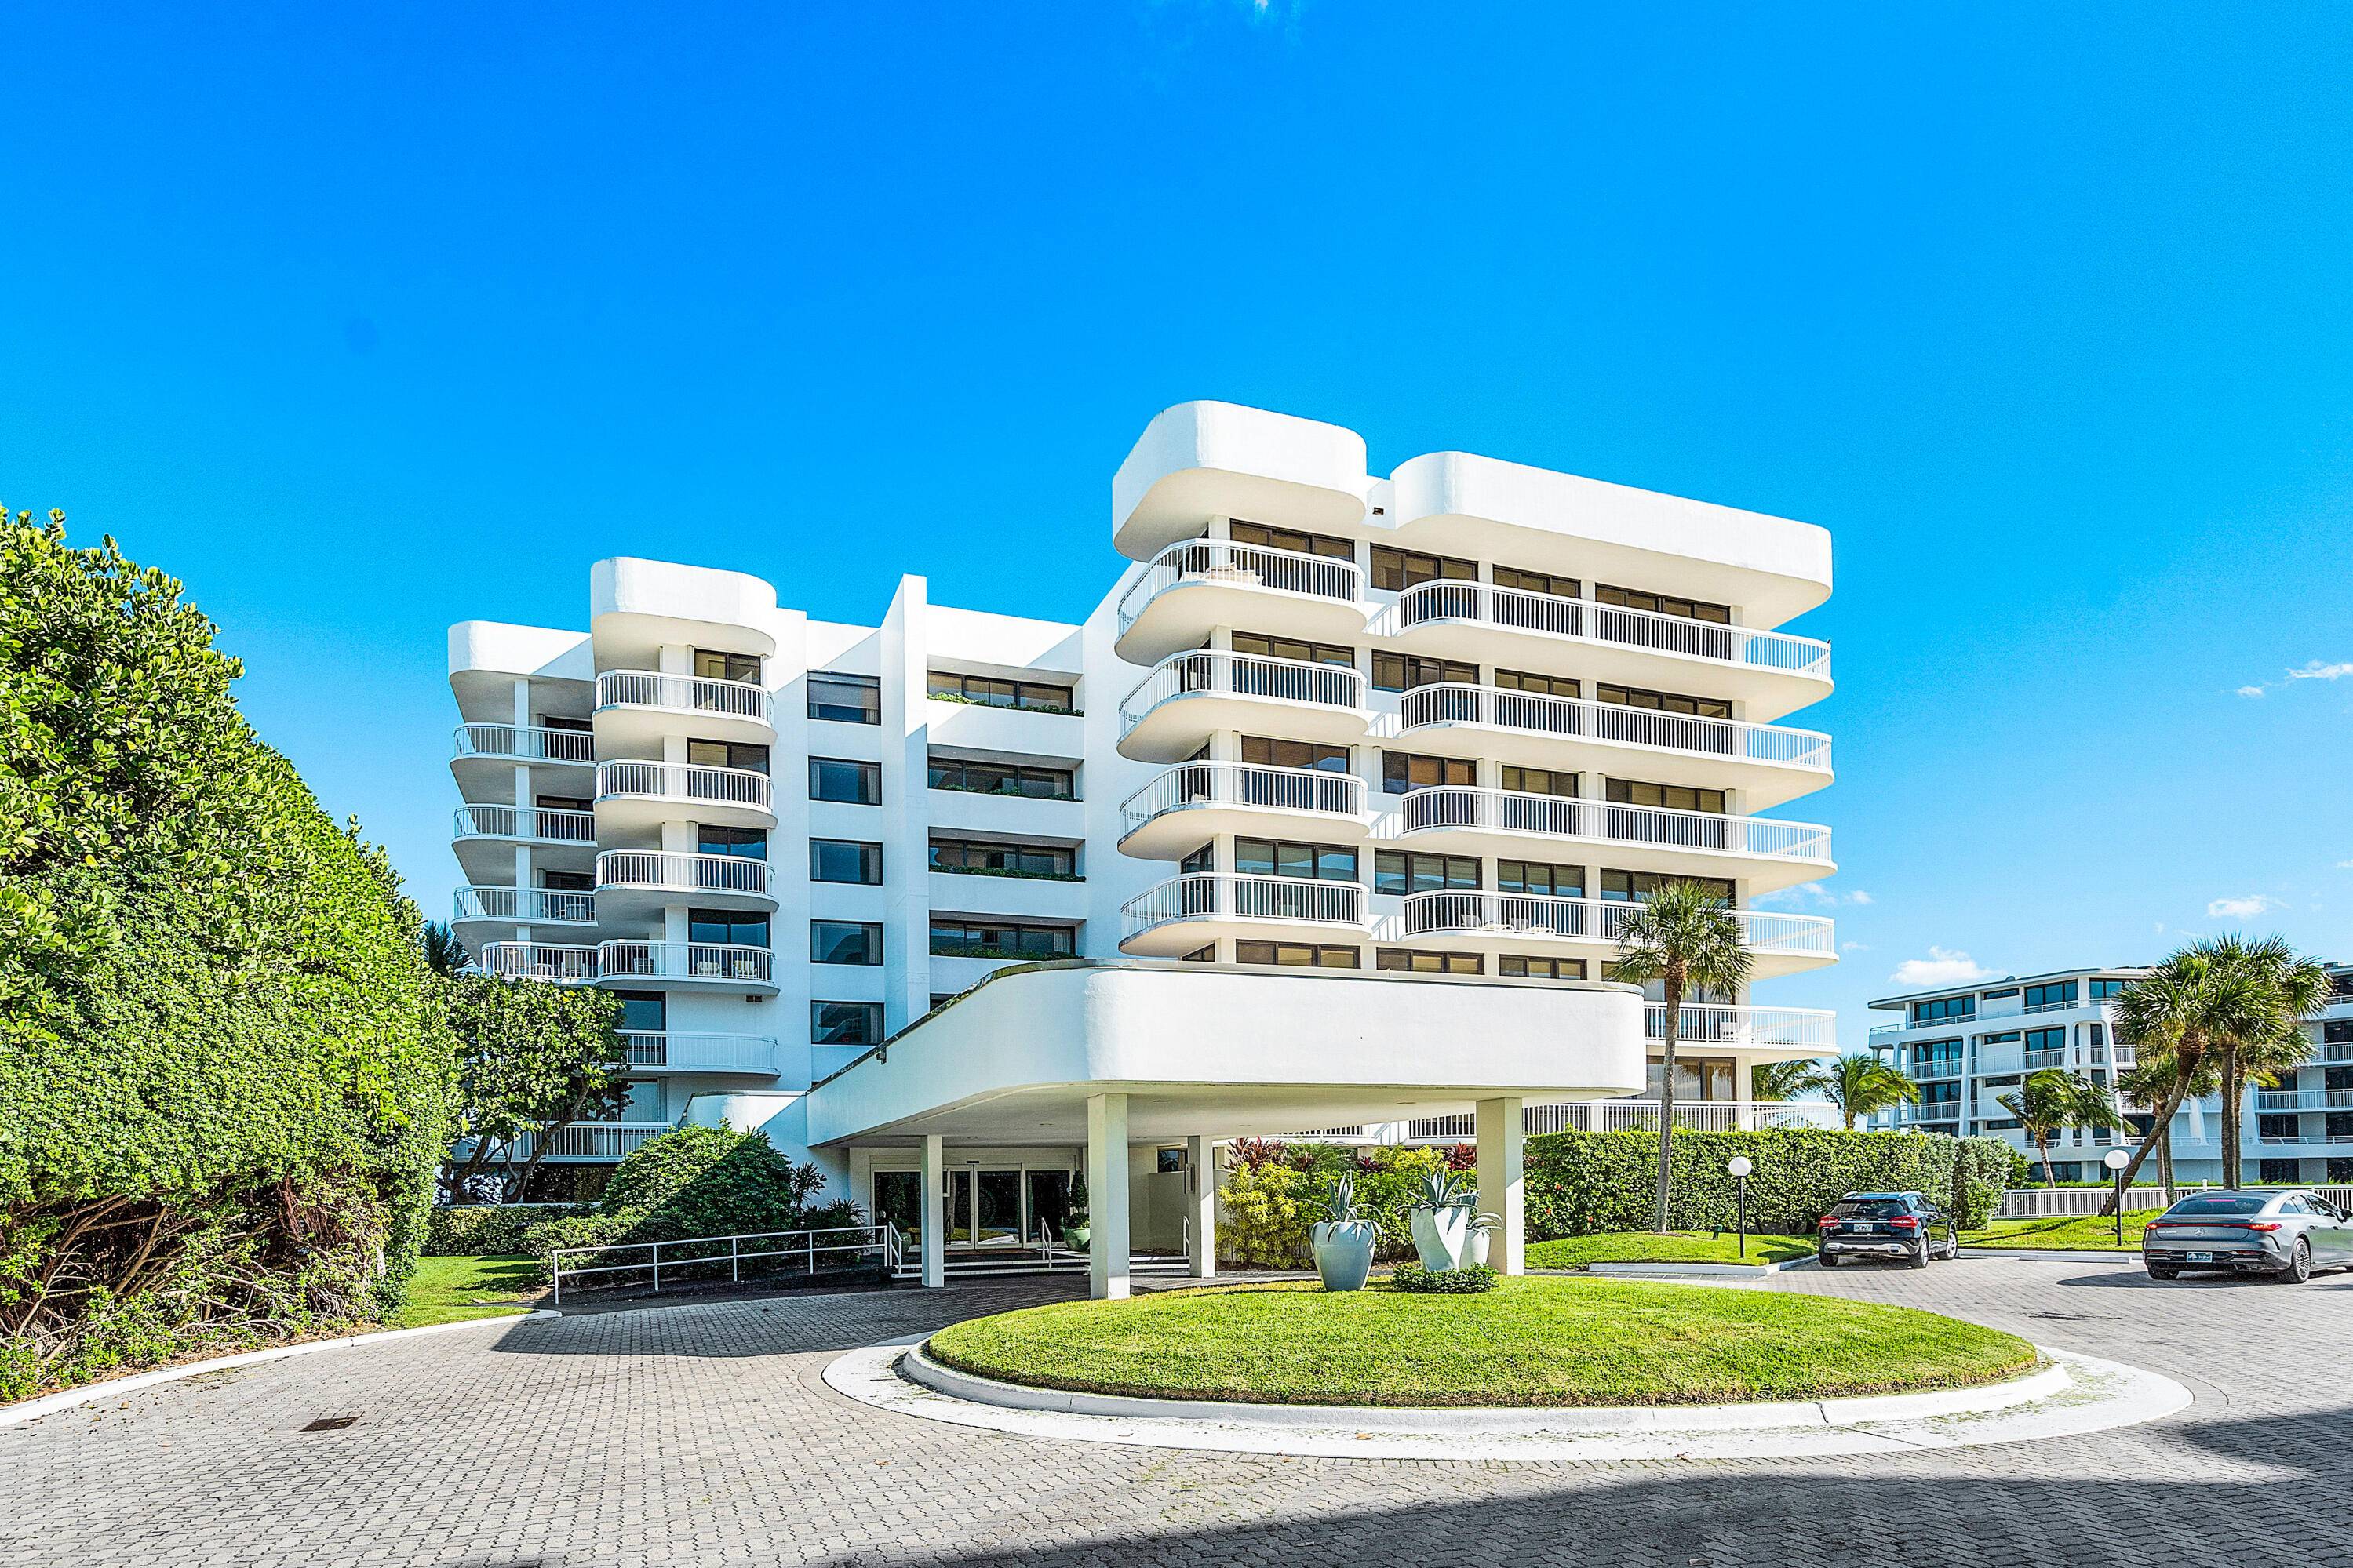 Spacious 3 bedroom, 3 bathroom Palm Beach Stratford garden apartment with a 885 sqft terrace to relax, entertain and enjoy the ocean breezes.